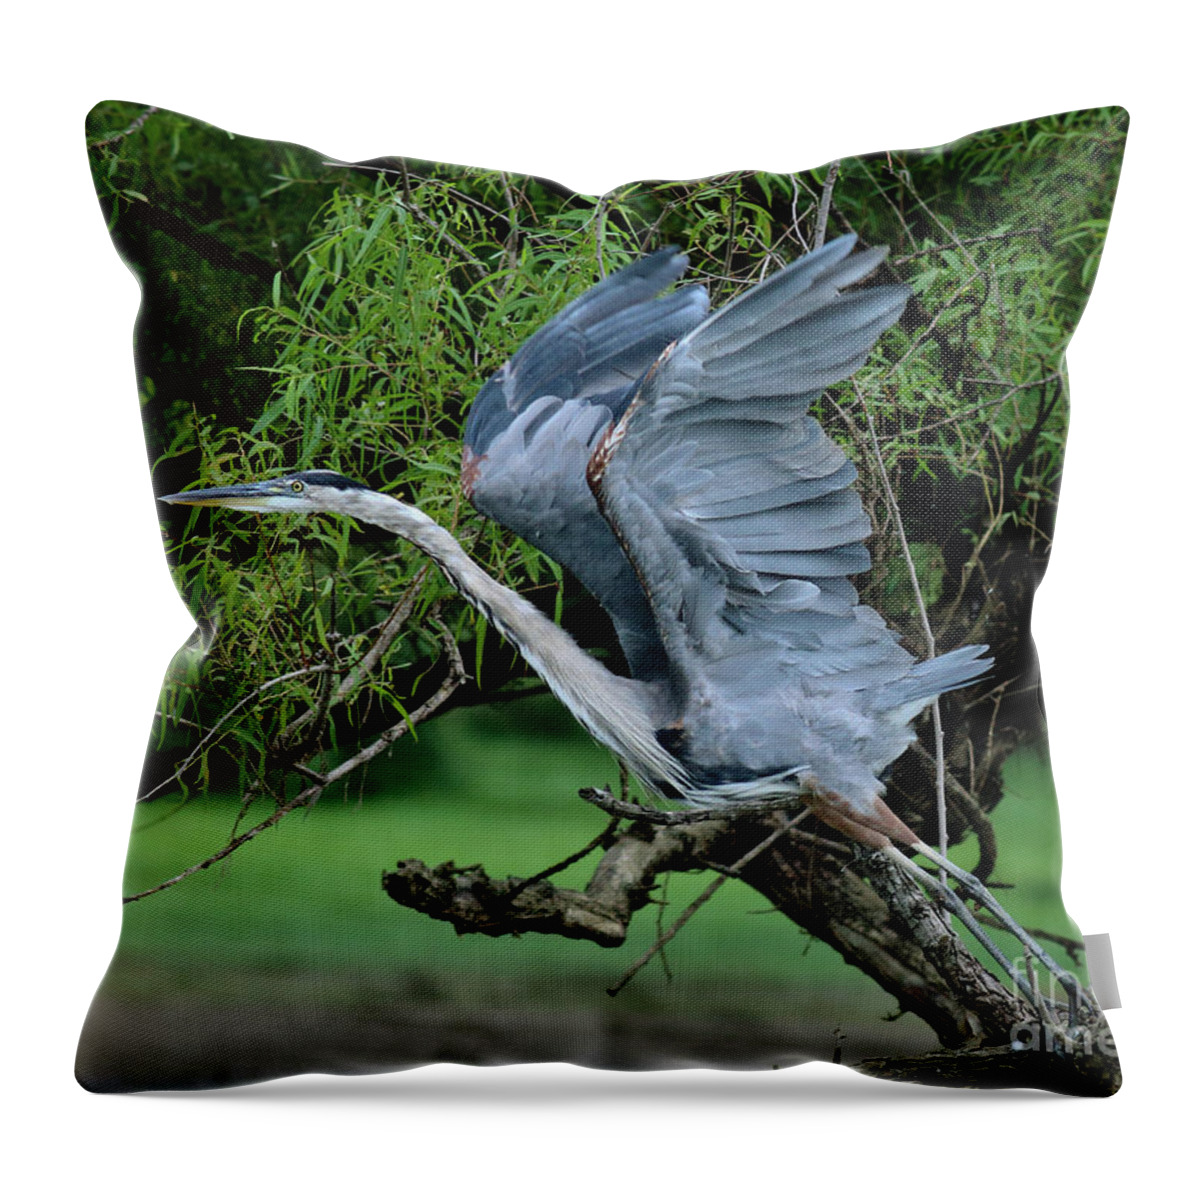 Great Throw Pillow featuring the photograph The Launch #1 by Douglas Stucky